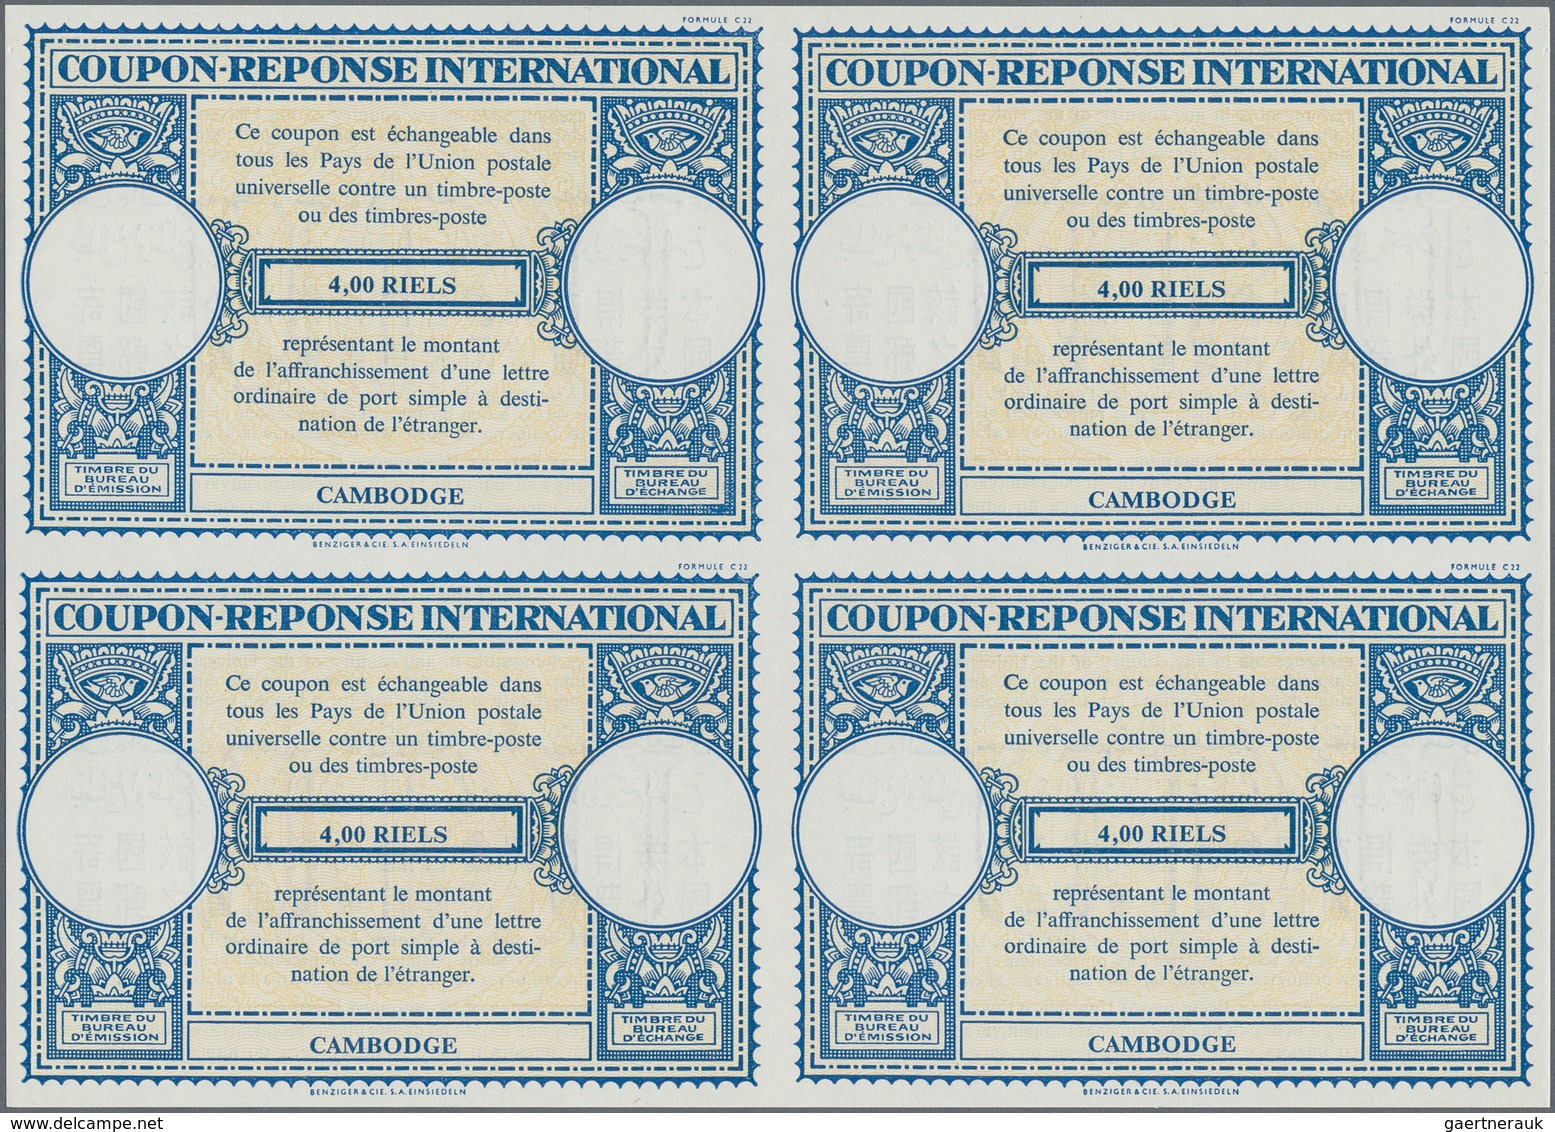 Kambodscha: 1955 (approx). International Reply Coupon 4,00 Riels (London Type) In An Unused Block Of - Cambodia